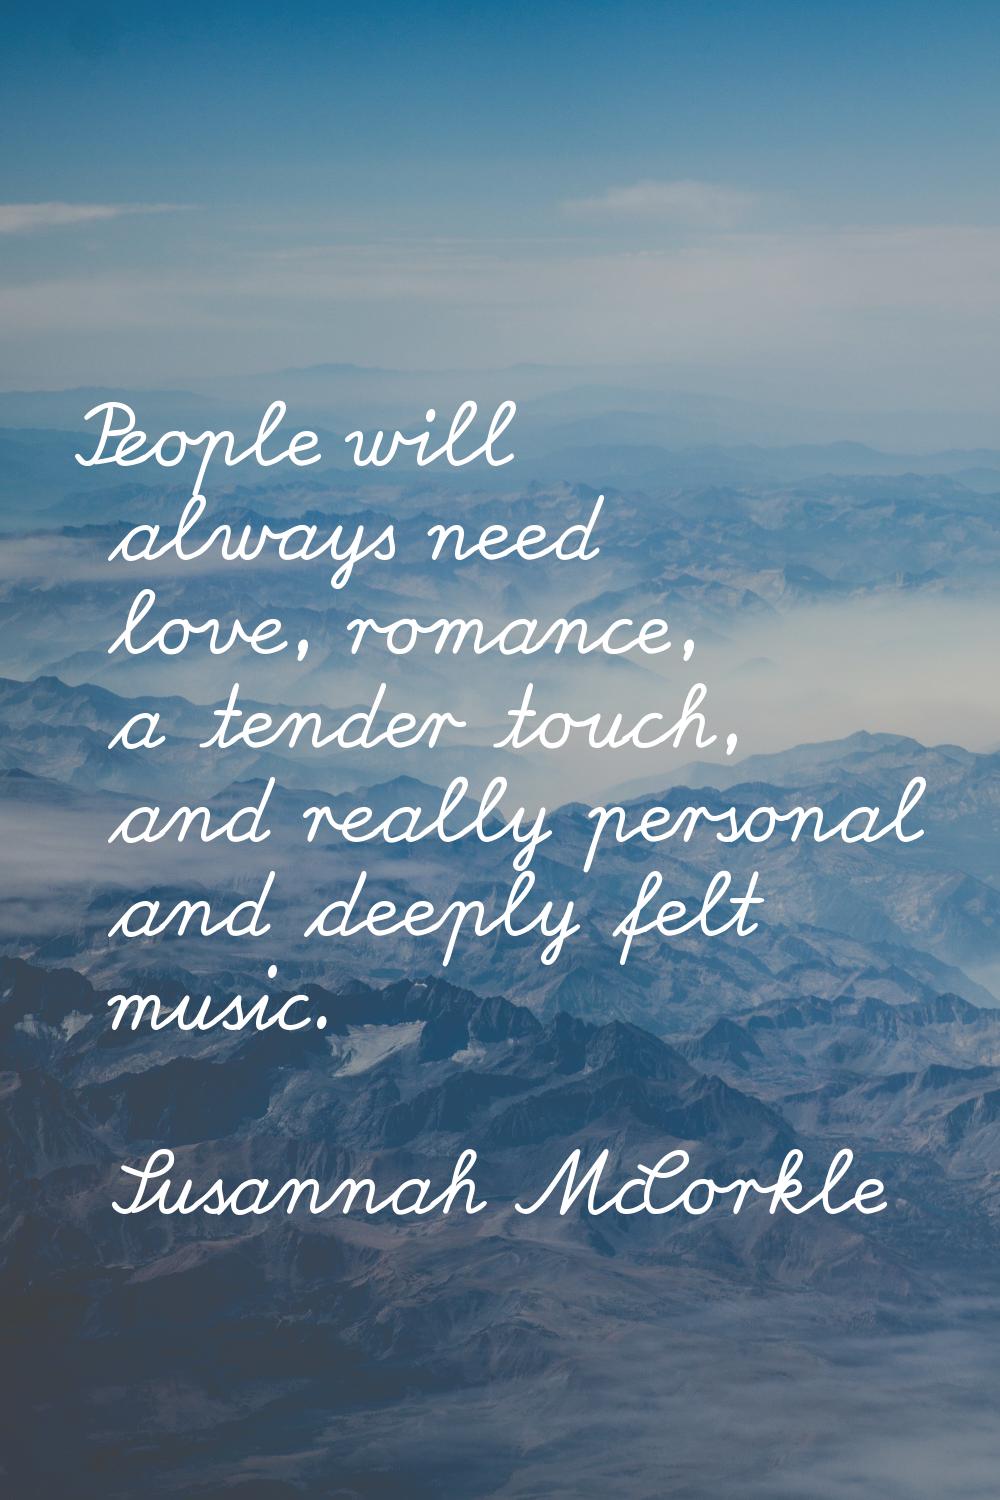 People will always need love, romance, a tender touch, and really personal and deeply felt music.